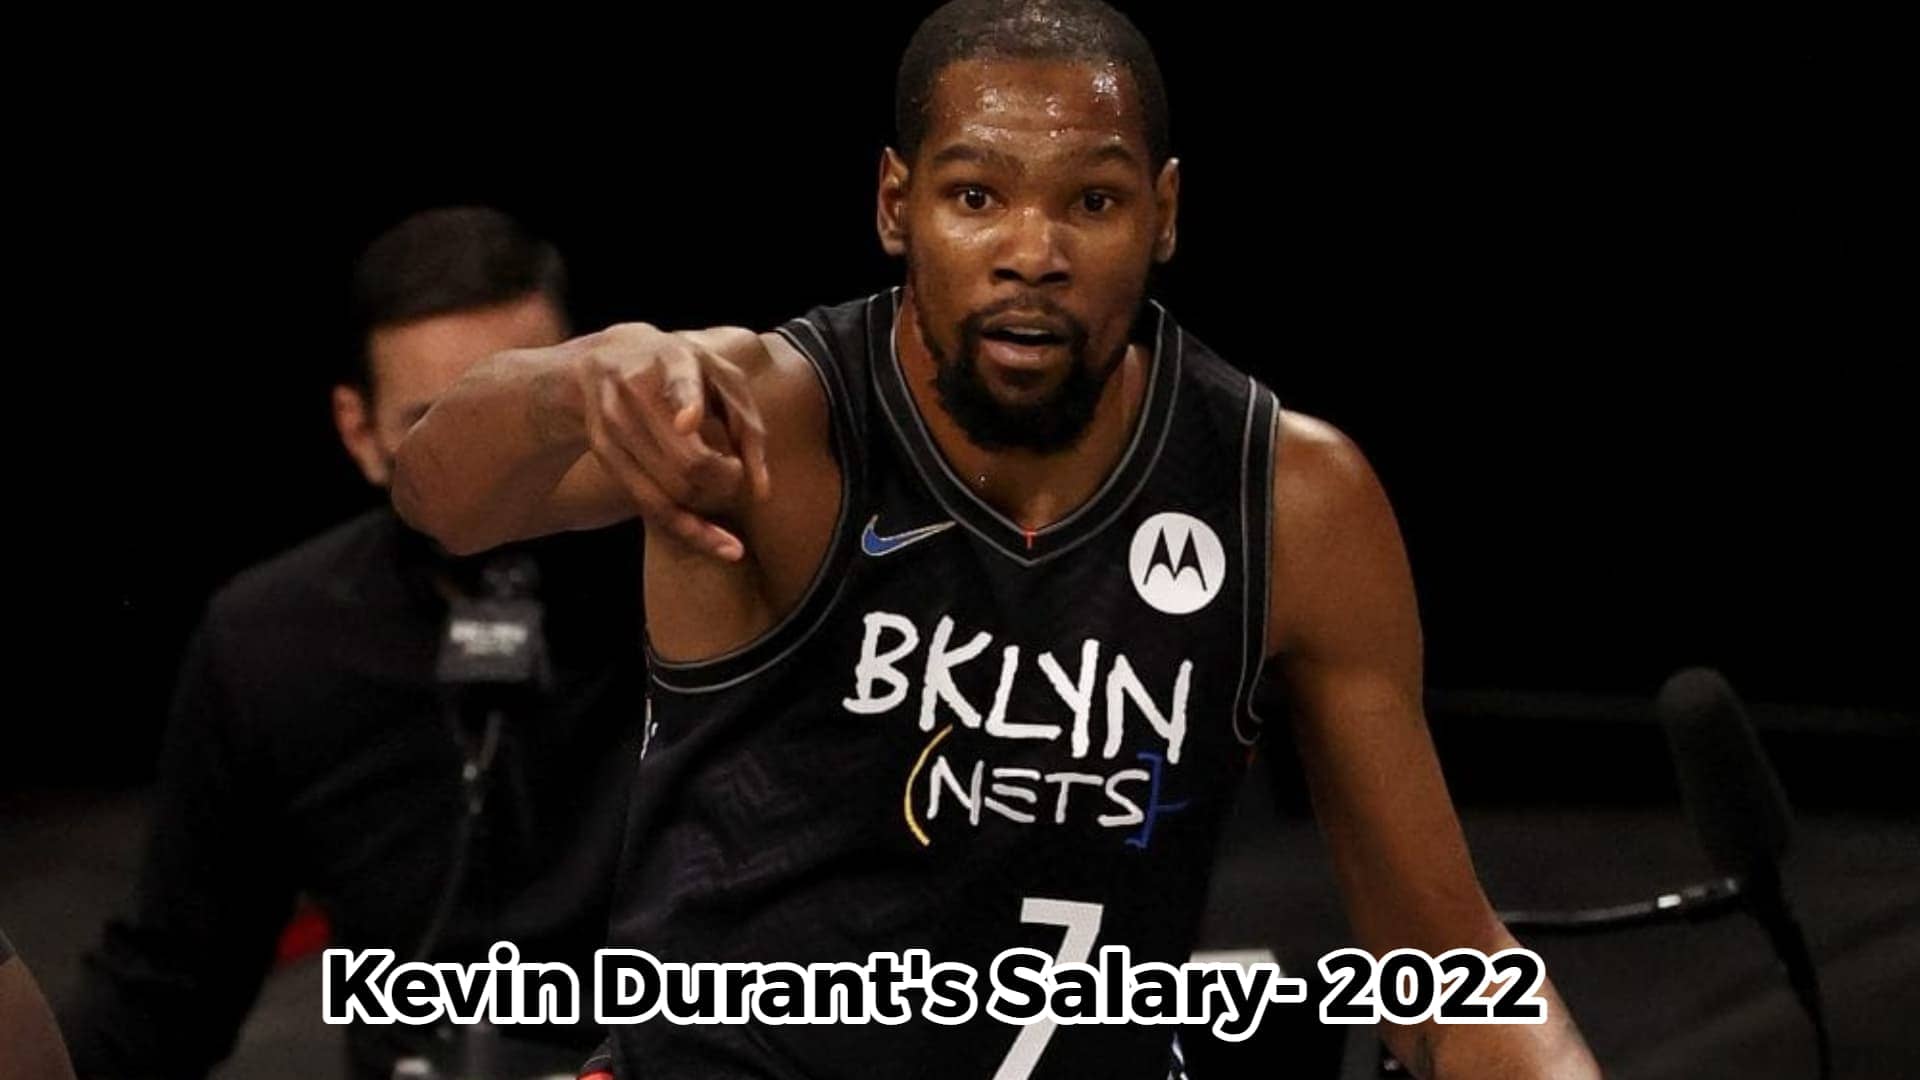 How much does Kevin Durant make per game?